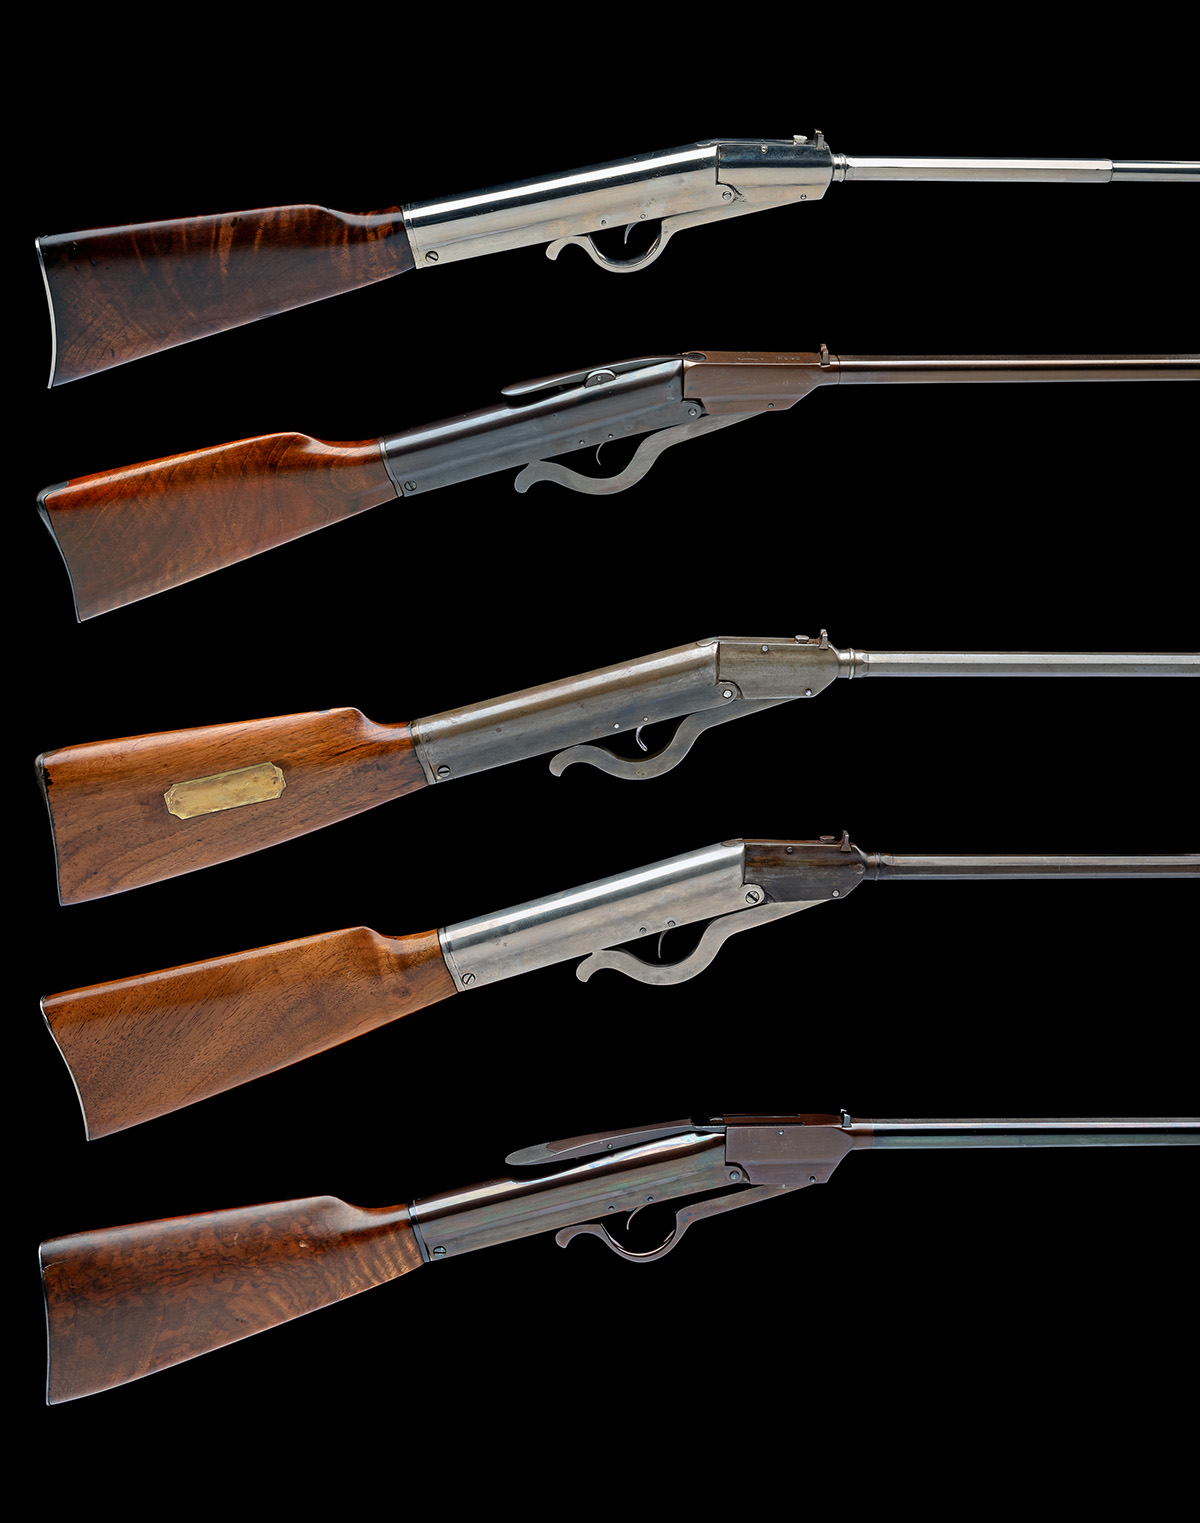 A COLLECTION OF FIVE RESTORED .177 GEM-STYLE AIR-RIFLES, serial numbers 73255, 39702, 91722, 66777